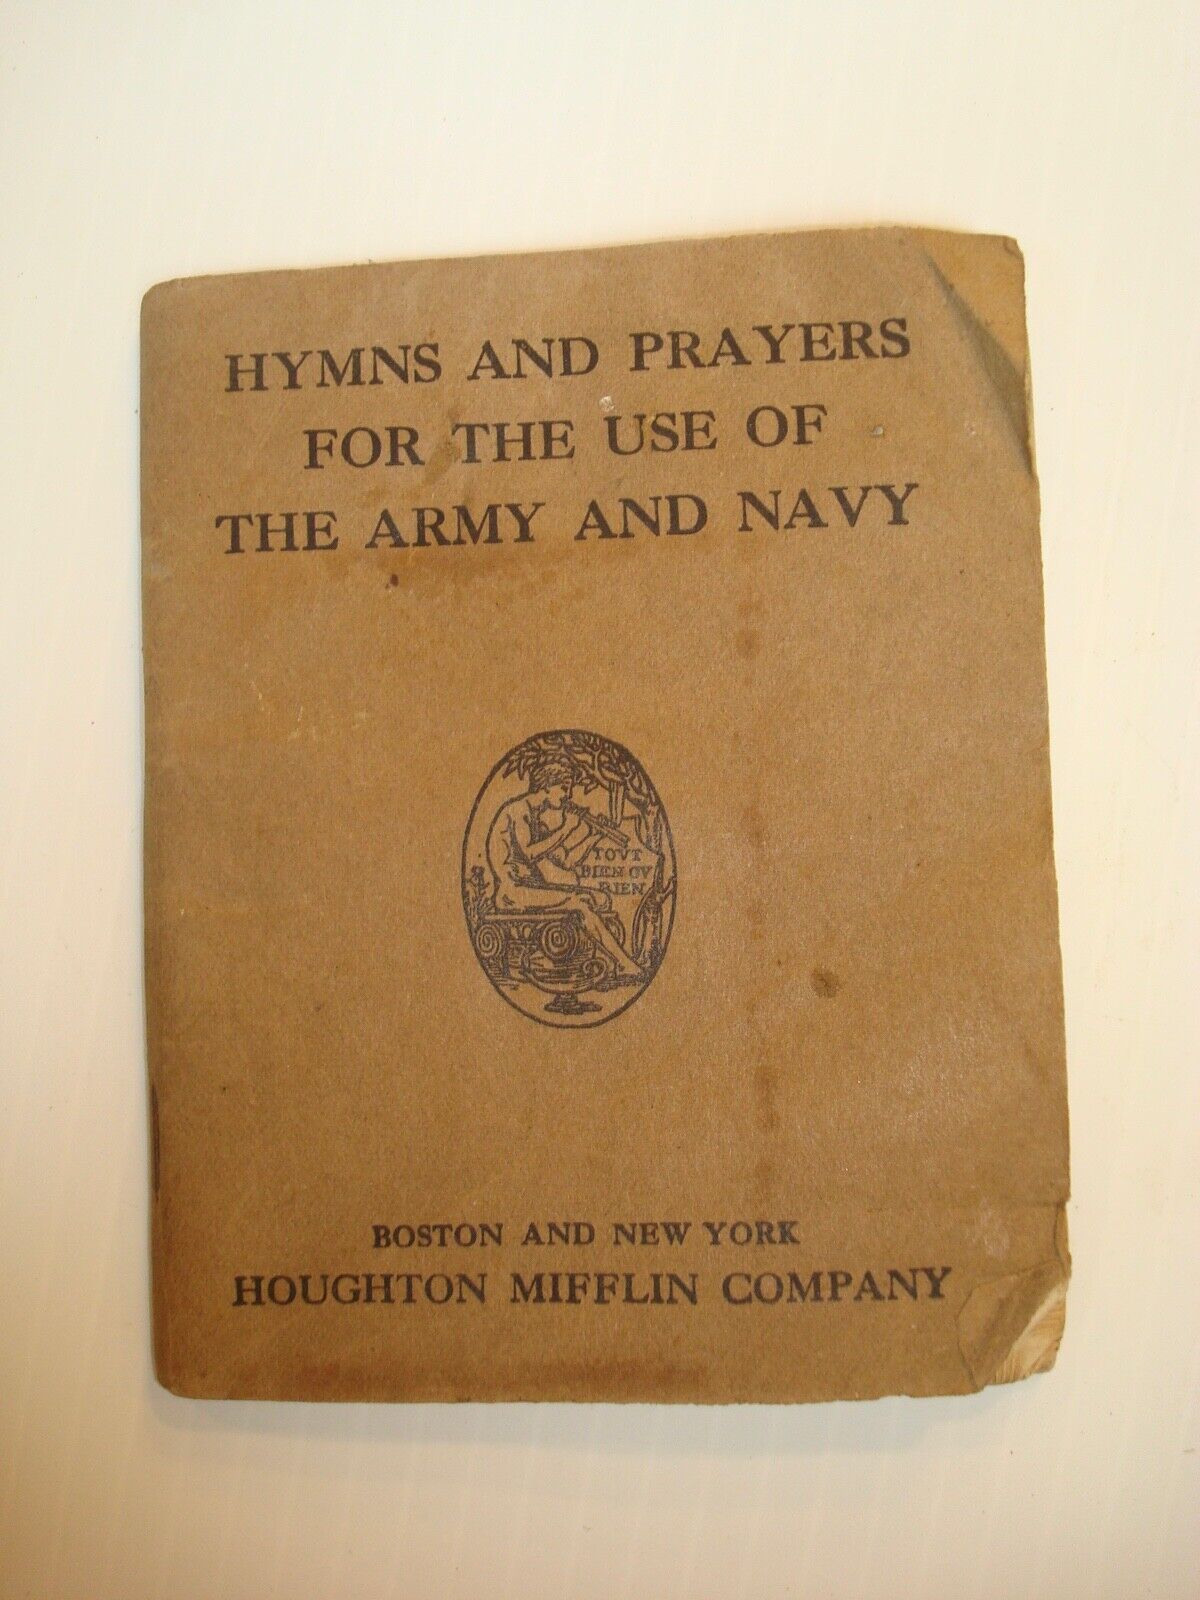 VTG RARE 1917 WWI Hymns & Prayers for the Use of the Army and Navy